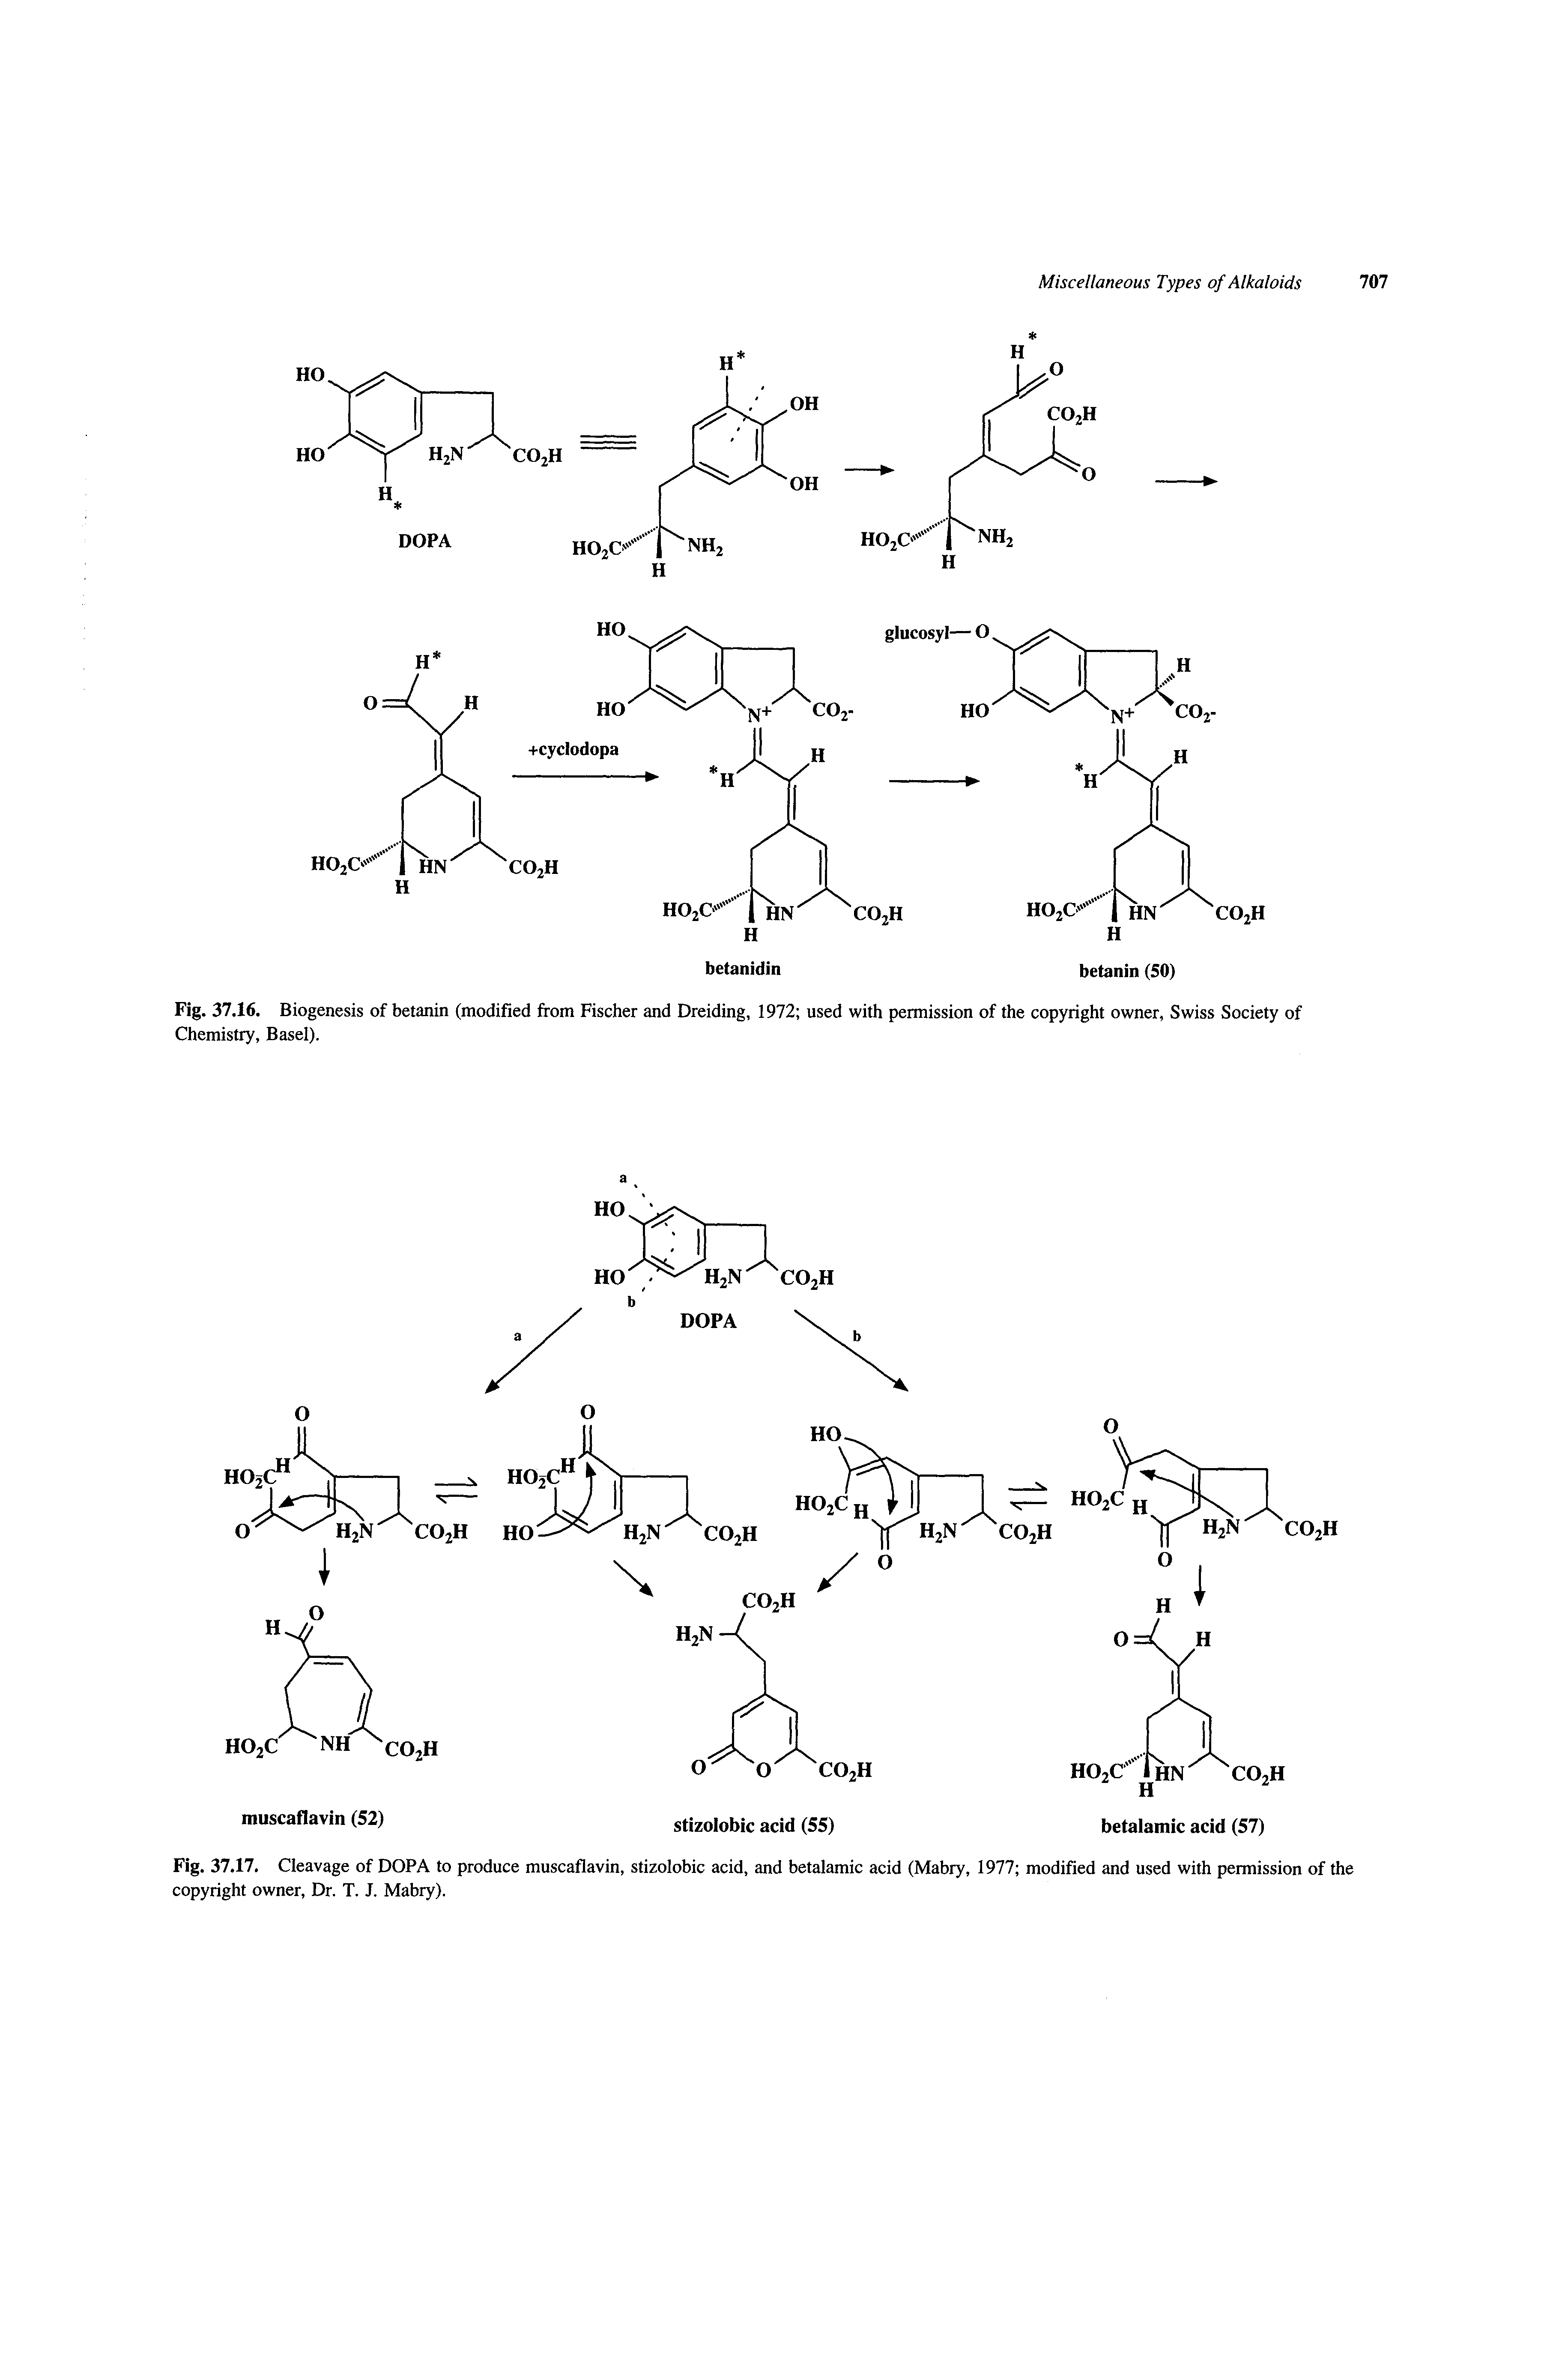 Fig. 37.17. Cleavage of DOPA to produce muscaflavin, stizolobic acid, and betalamic acid (Mabry, 1977 modified and used with permission of the copyright owner, Dr. T. J. Mabry).